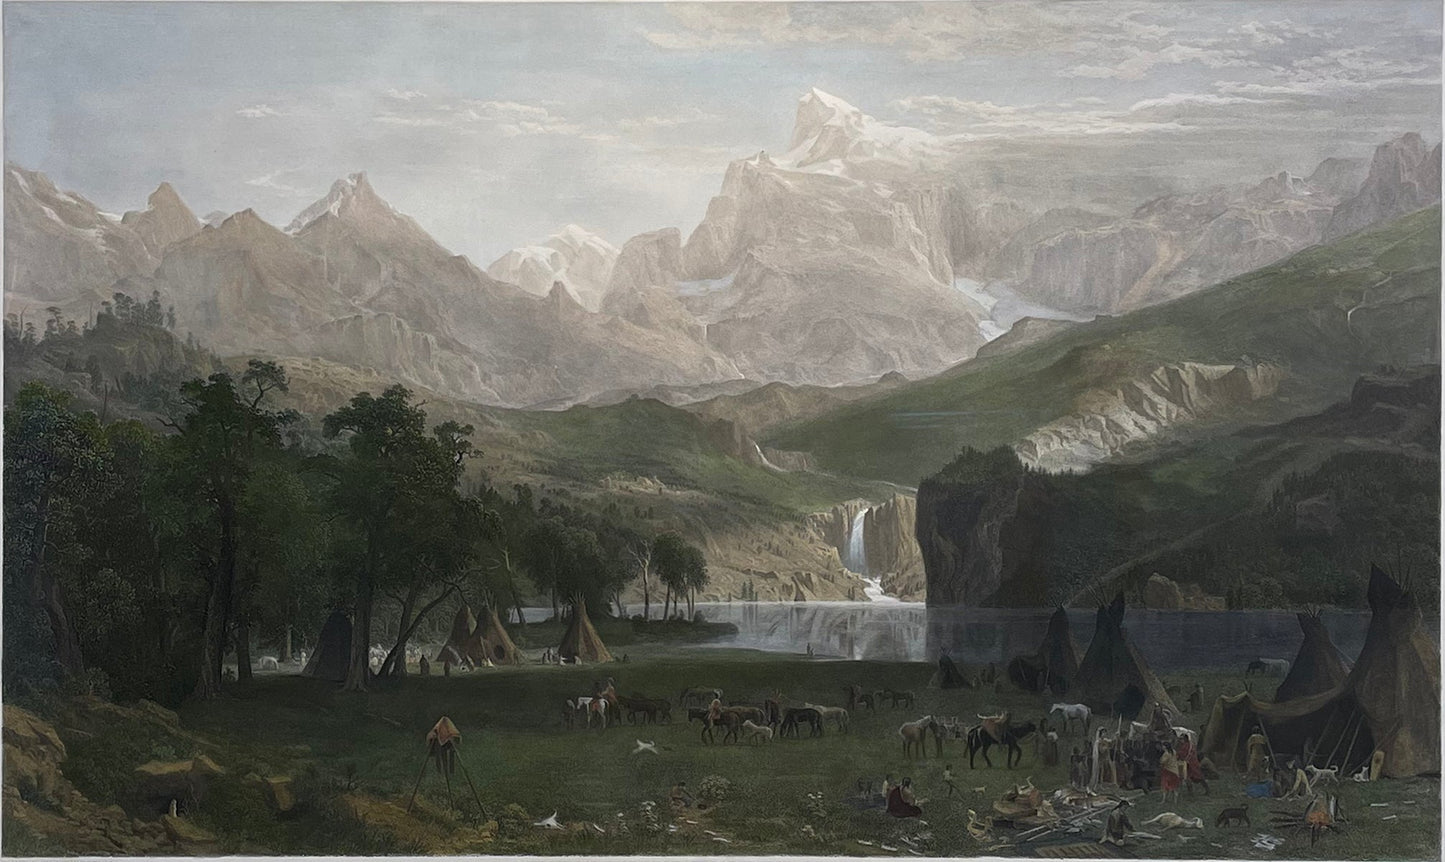 Albert Bierstadt. 'The Rocky Mountains'. Published London, Thomas McLean, 1869